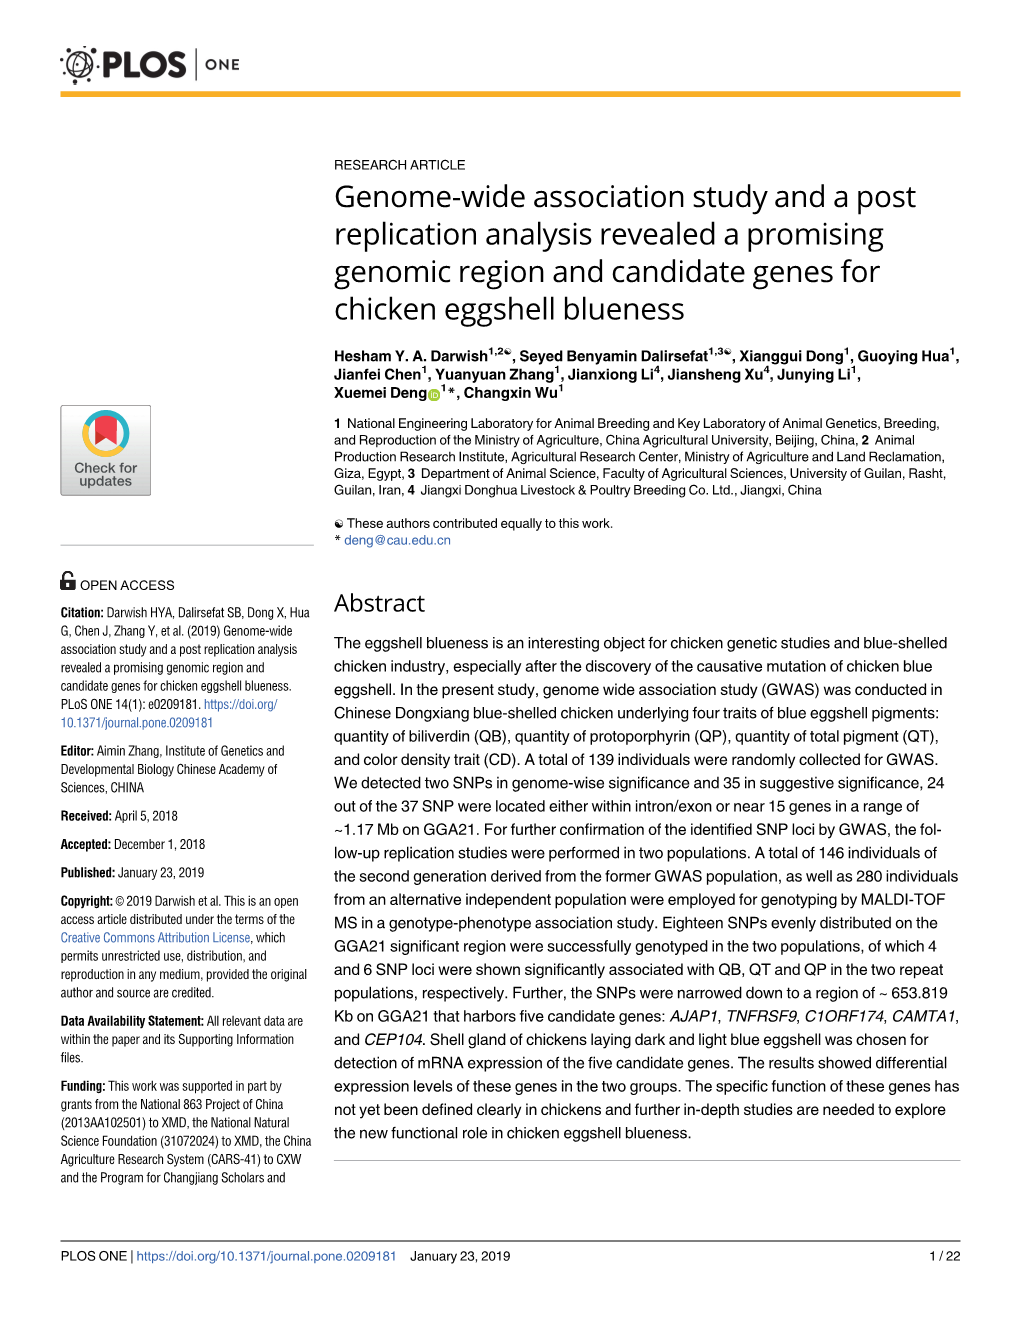 Genome-Wide Association Study and a Post Replication Analysis Revealed a Promising Genomic Region and Candidate Genes for Chicken Eggshell Blueness